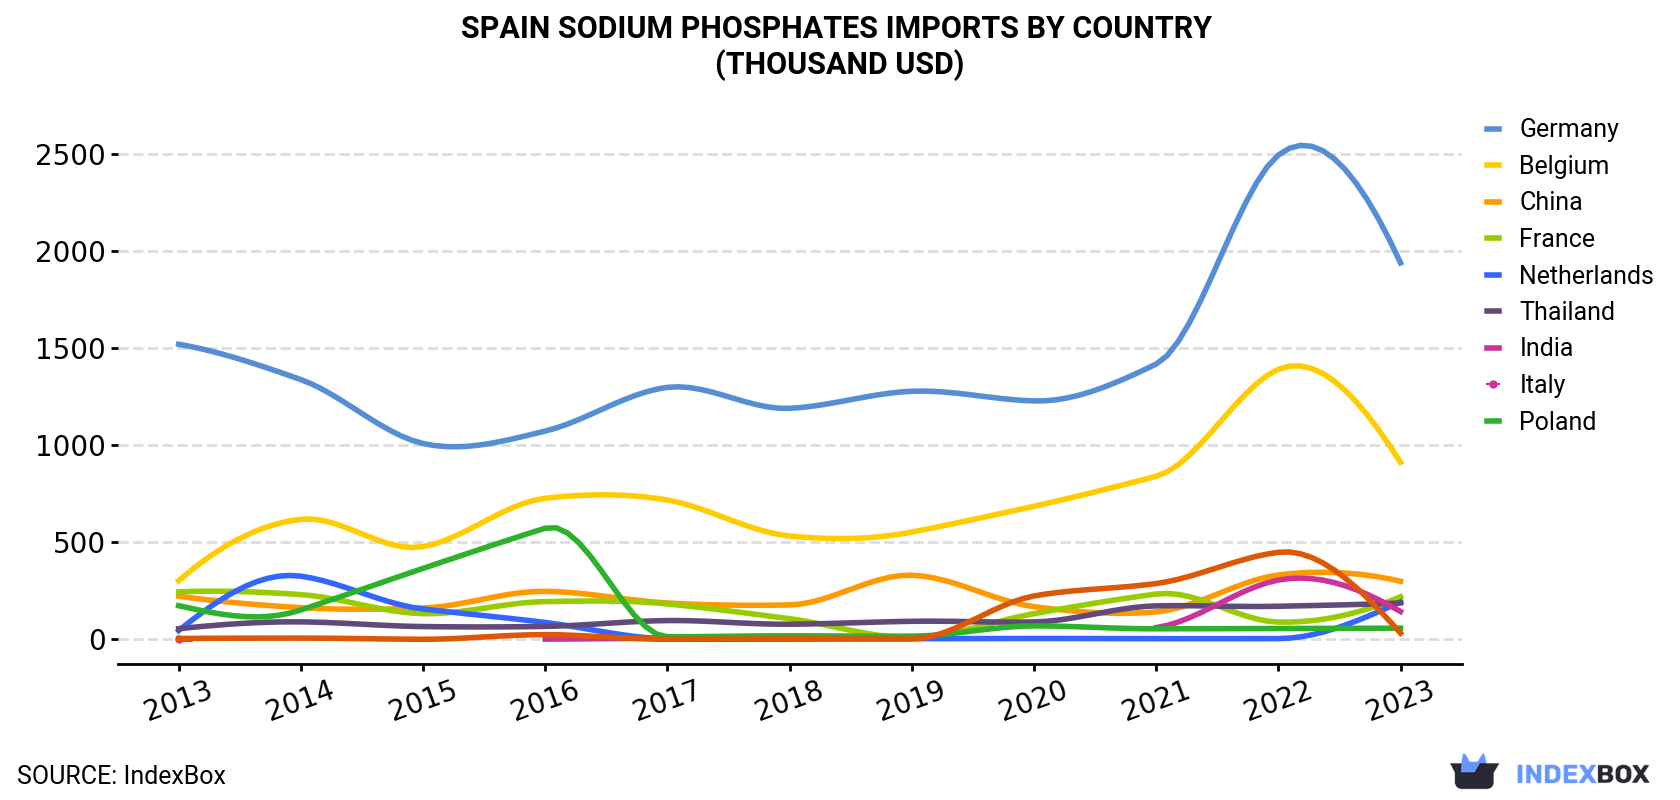 Spain Sodium Phosphates Imports By Country (Thousand USD)